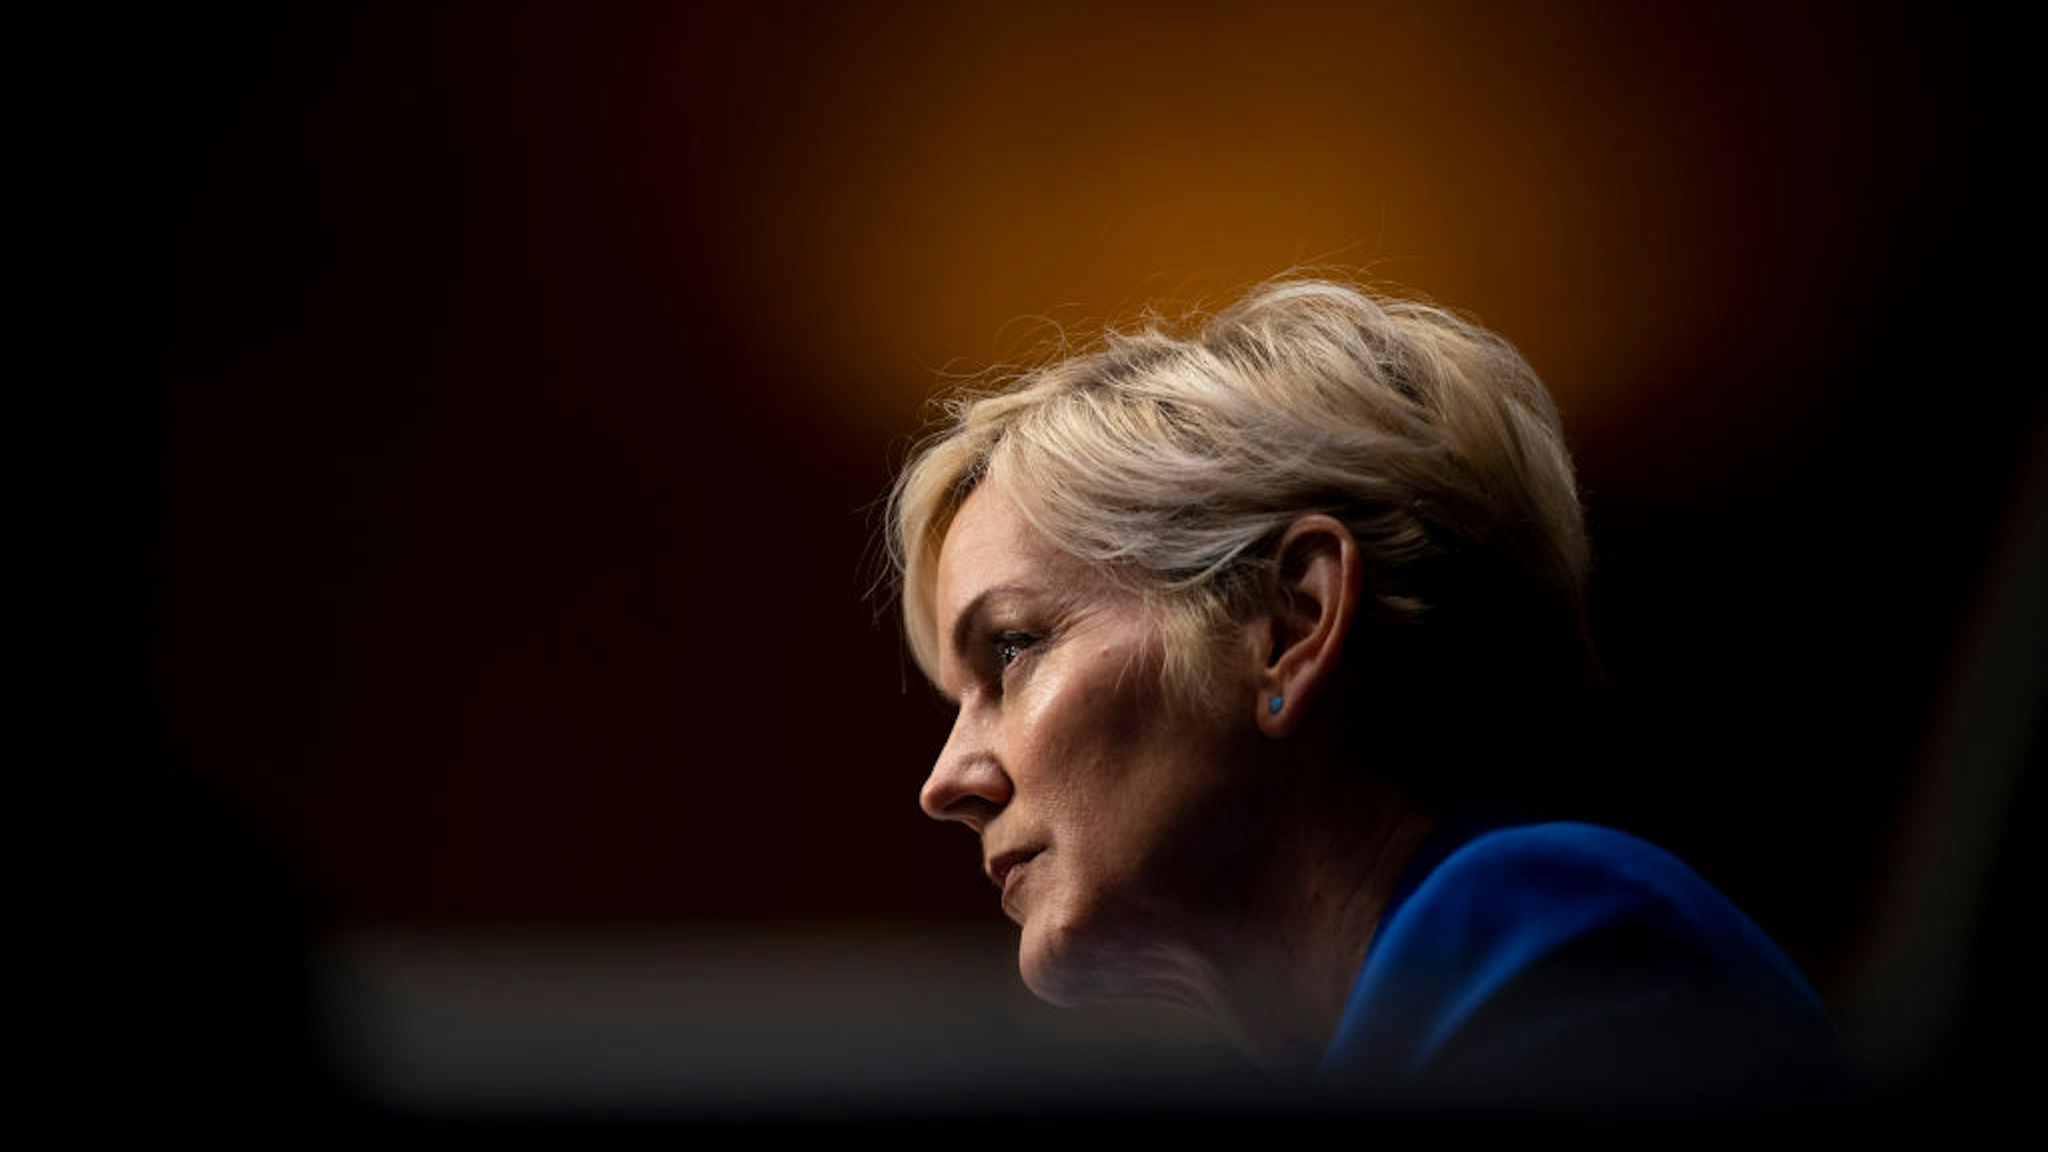 Former Michigan Governor Jennifer Granholm speaks during the Senate Energy and Natural Resources Committee hearing to examine her nomination to be Secretary of Energy, on Capitol Hill in Washington, DC, on January 27, 2021. (Photo by JIM WATSON / POOL / AFP